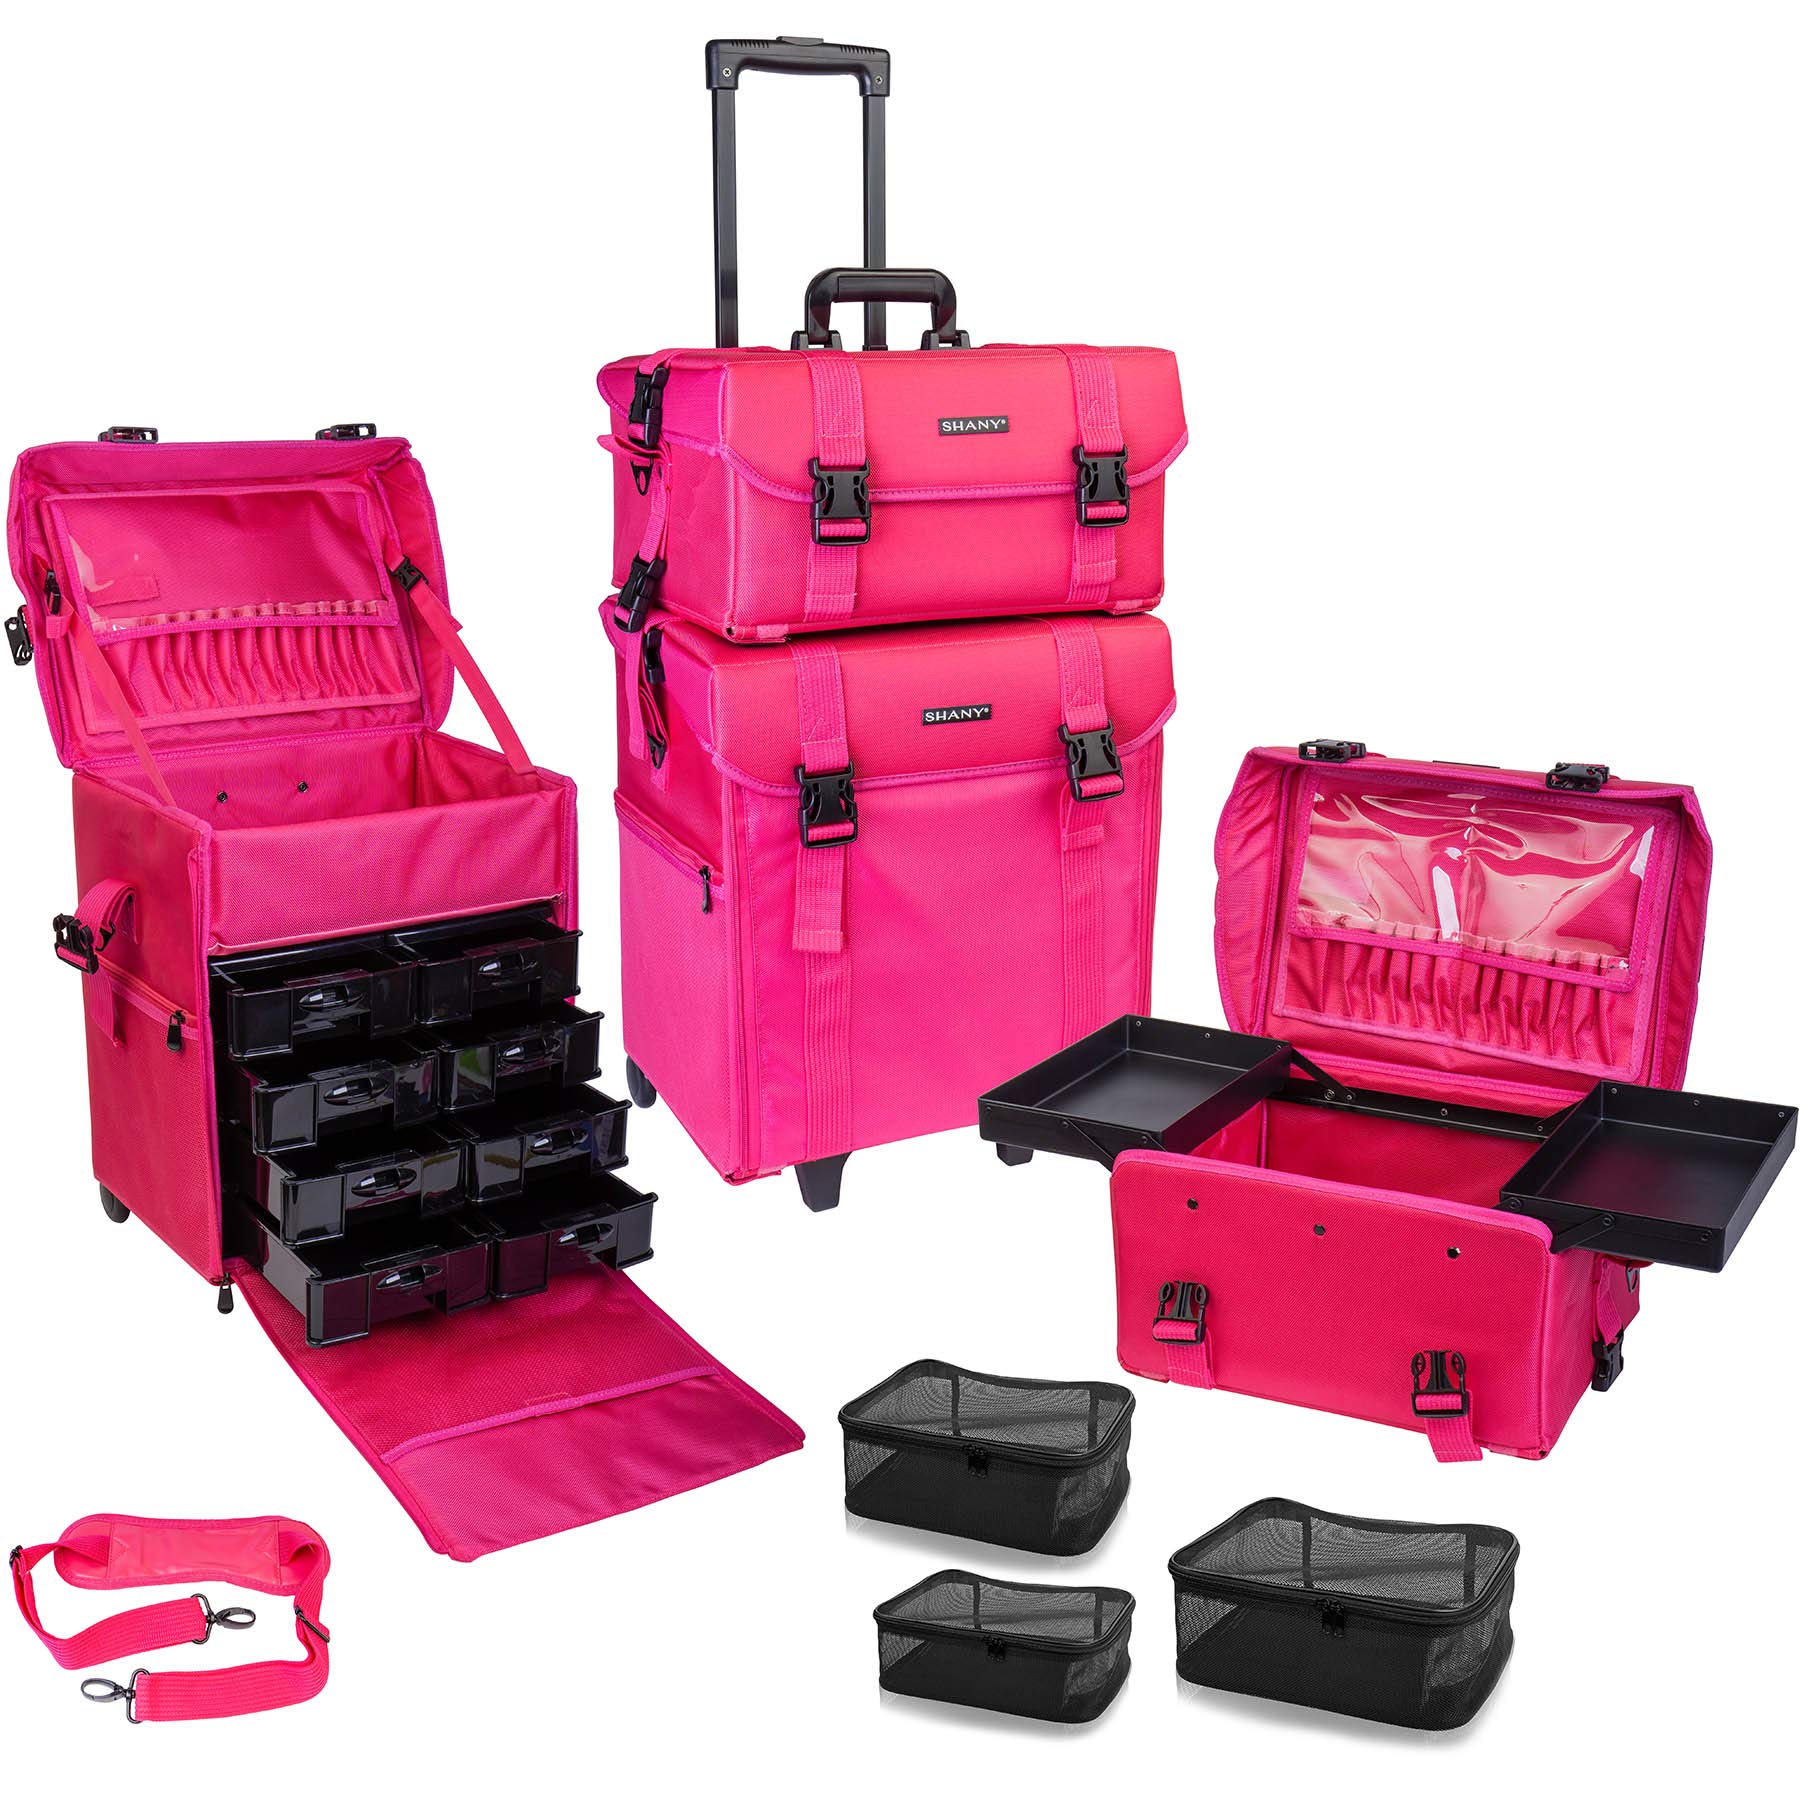 SHANY Soft Makeup Artist Rolling Trolley Cosmetic Case with Free Set of Mesh Bags, Summer Orchid